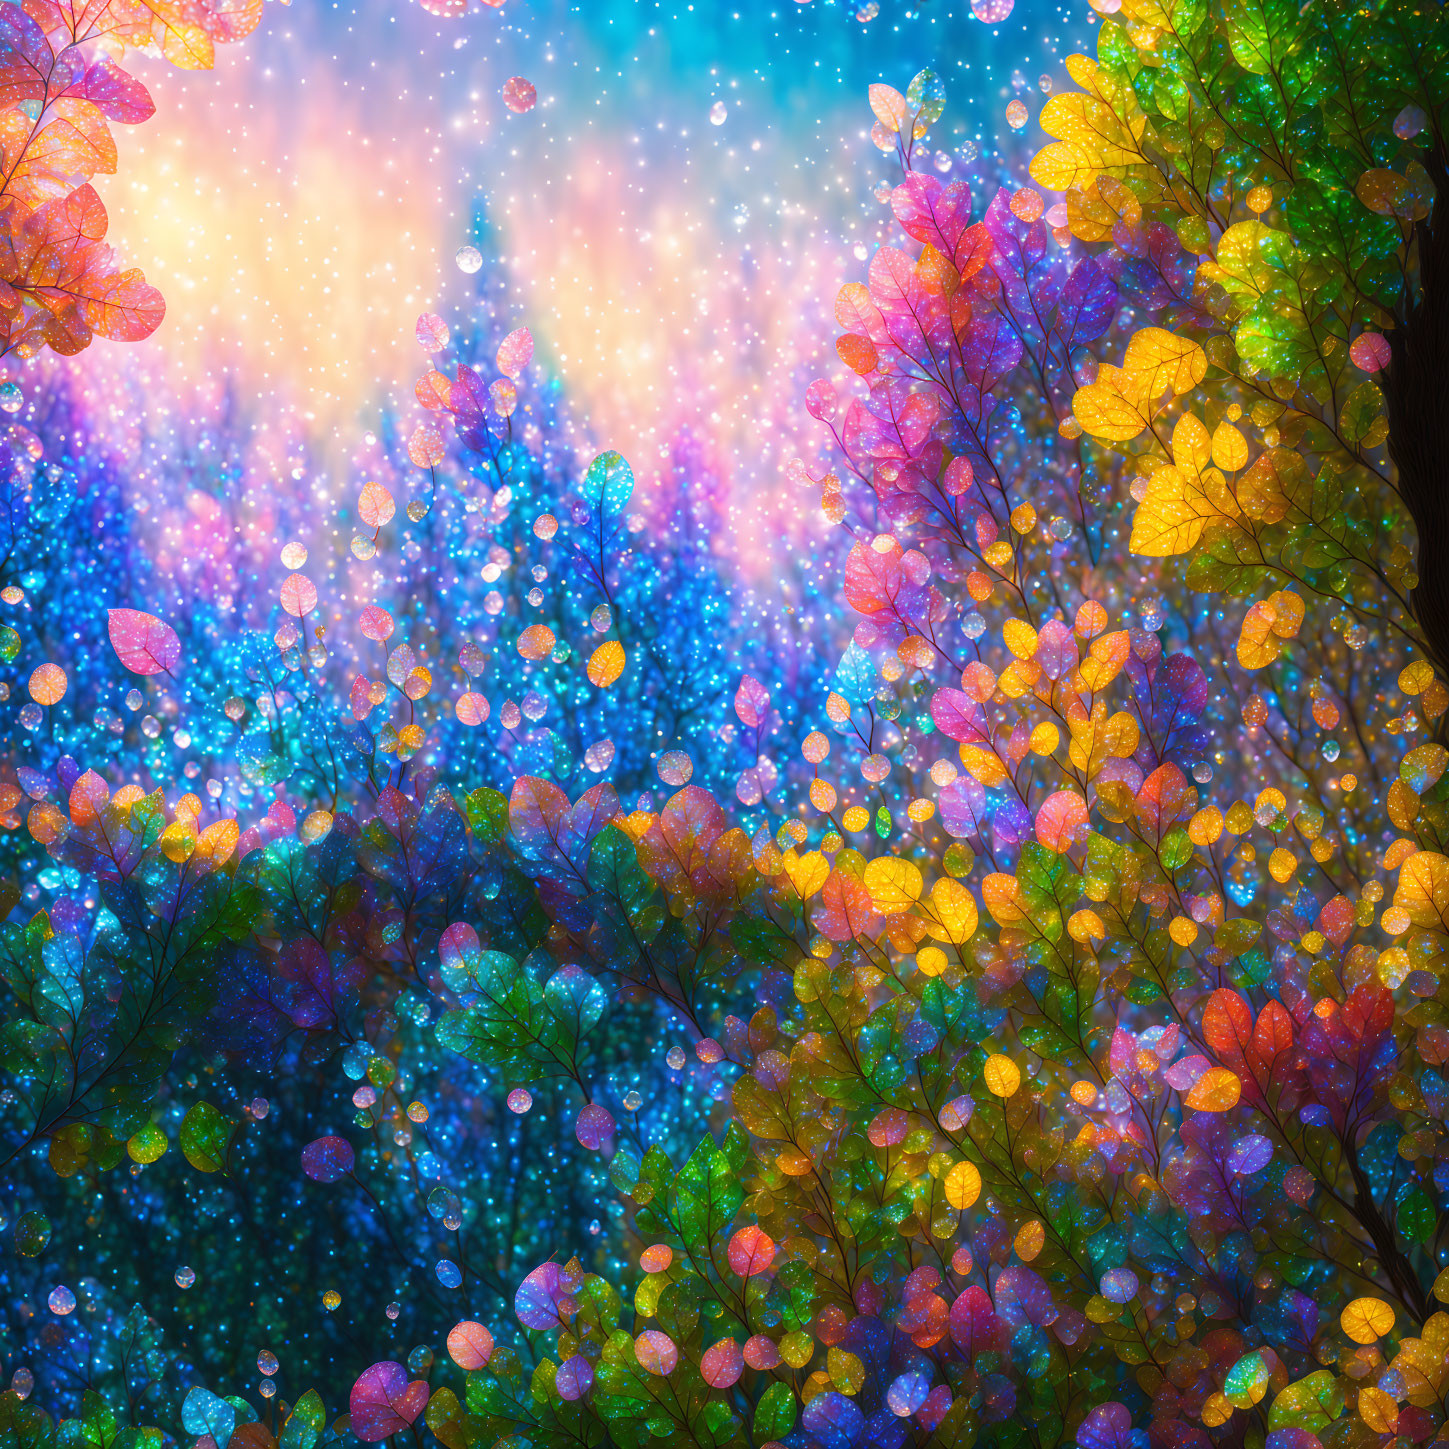 Colorful Leaves and Glittering Lights in Magical Forest Scene